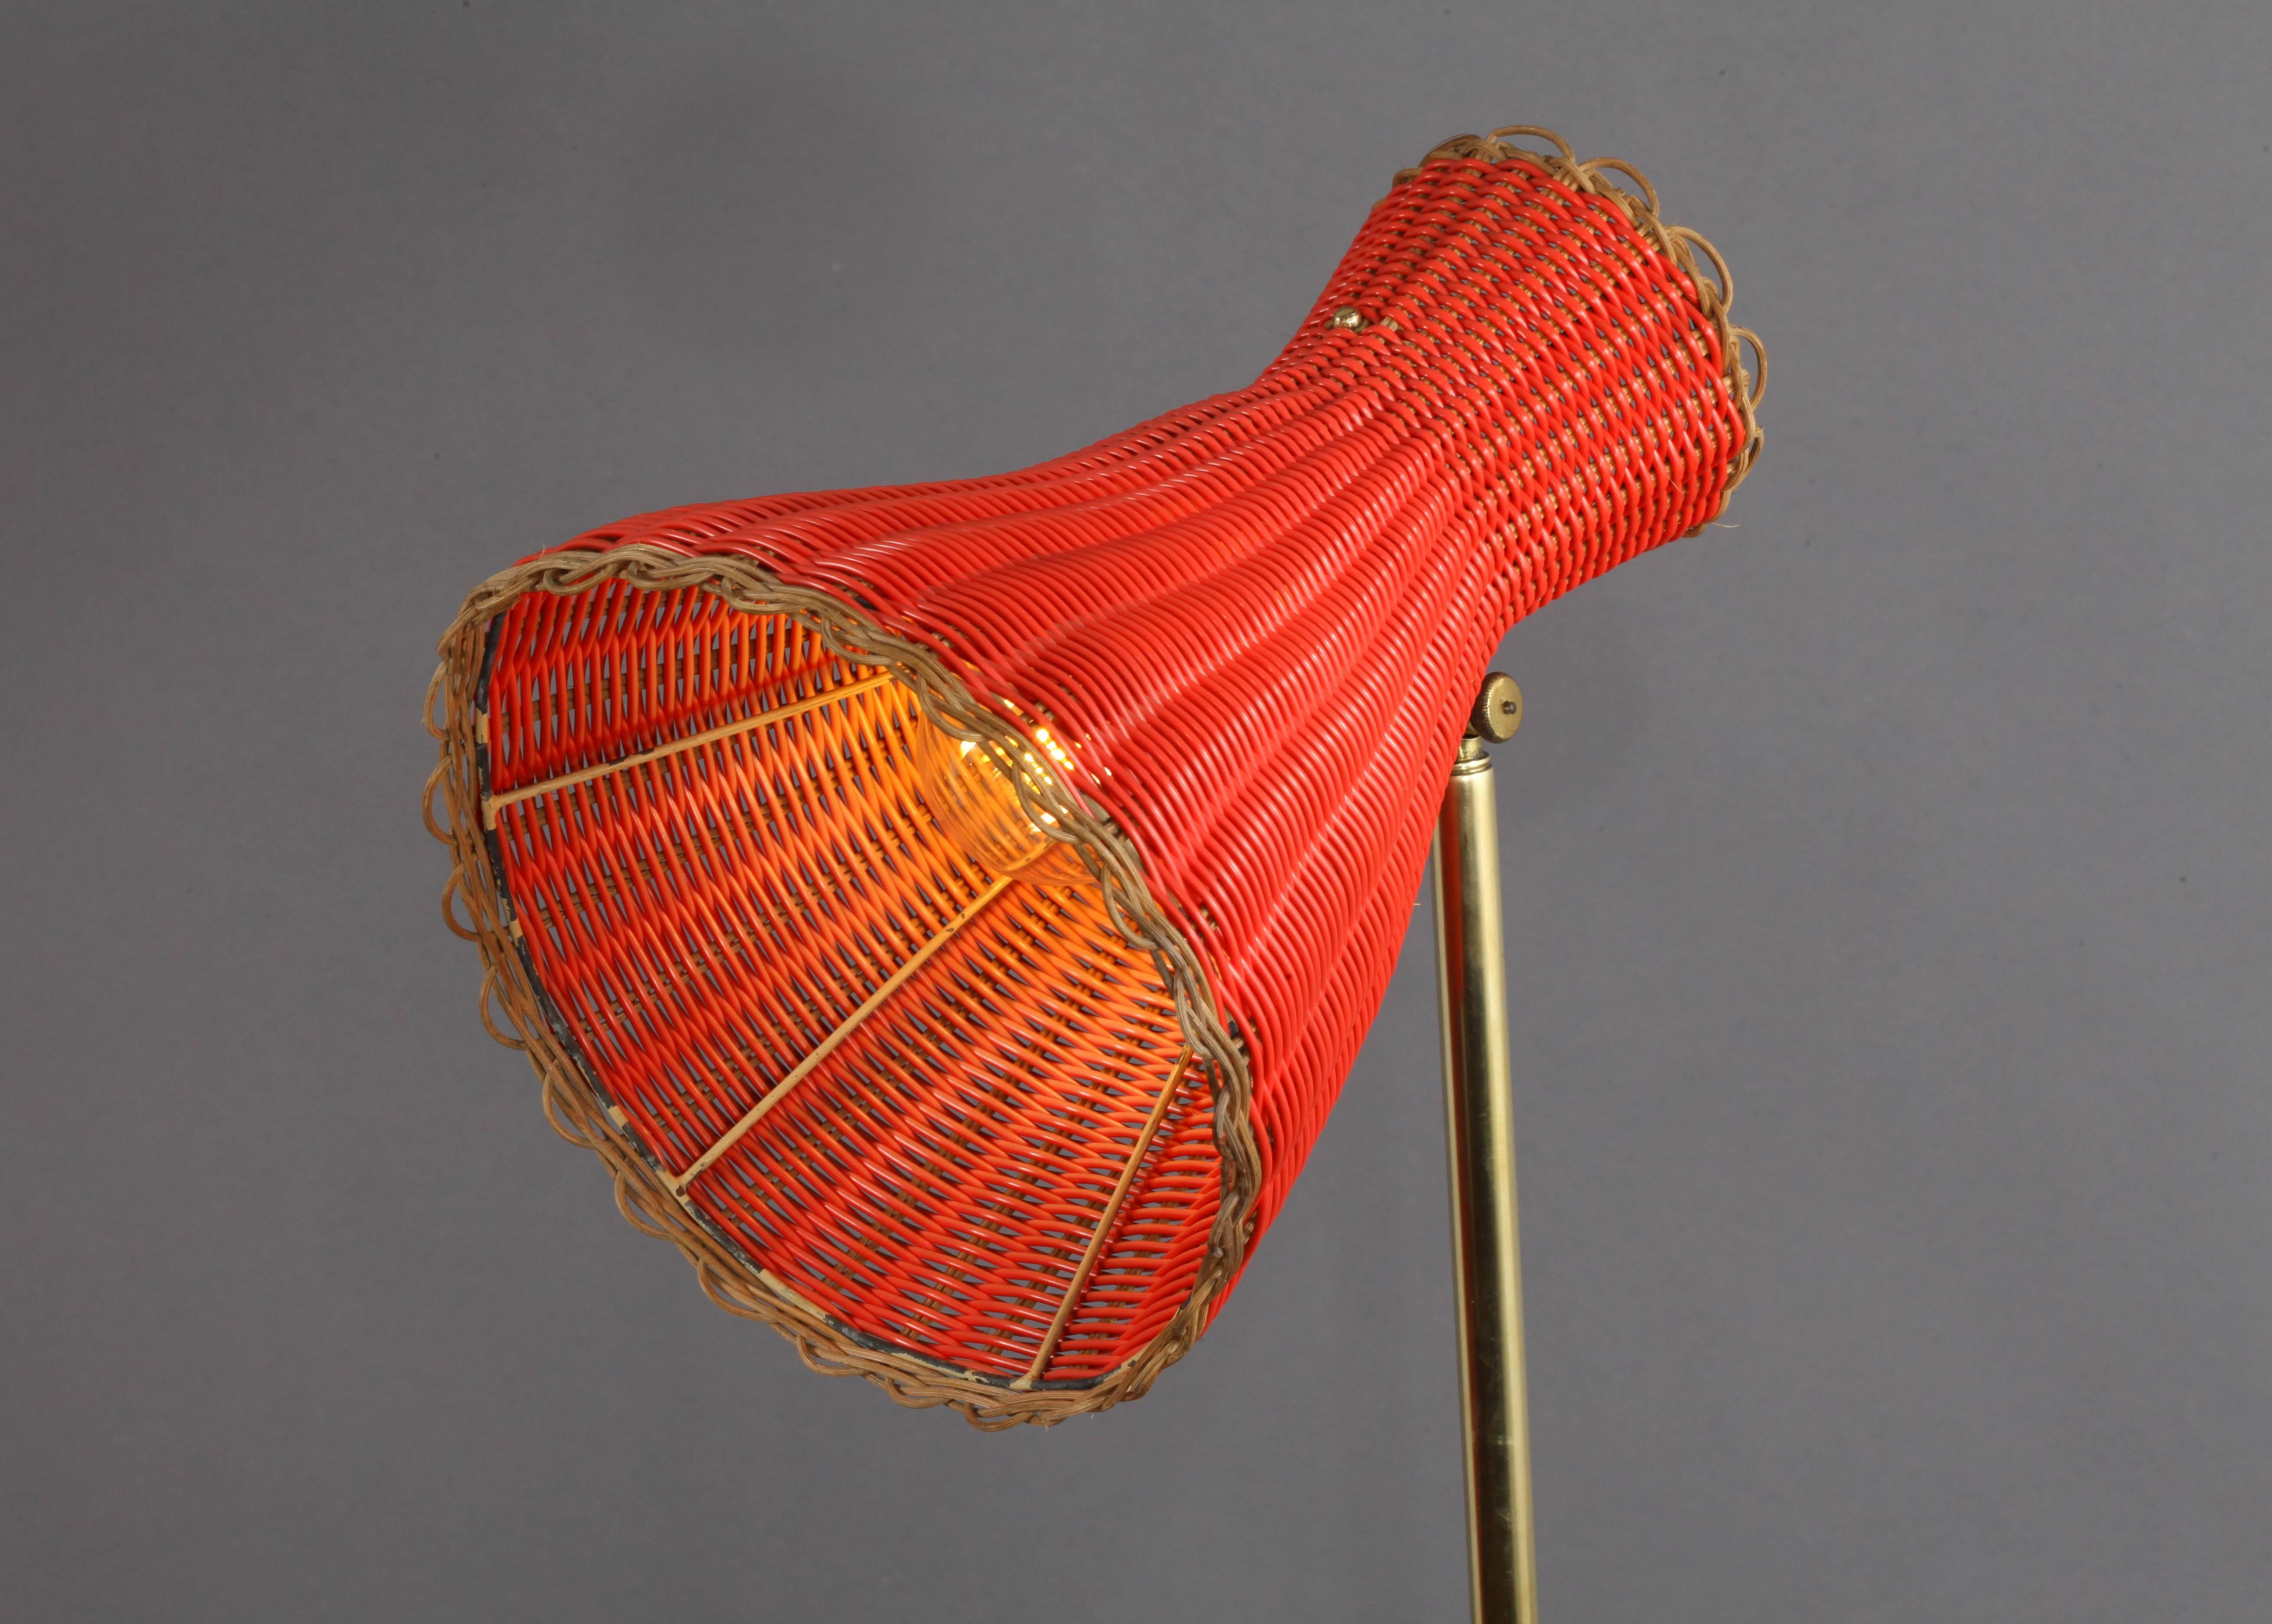 Floor lamp,
designed Rupert Nikoll,
Vienna, 1950.
Black lacquered base, brass stam.
Movable woven red bast shade.
Measures: Height 60 inch.
 